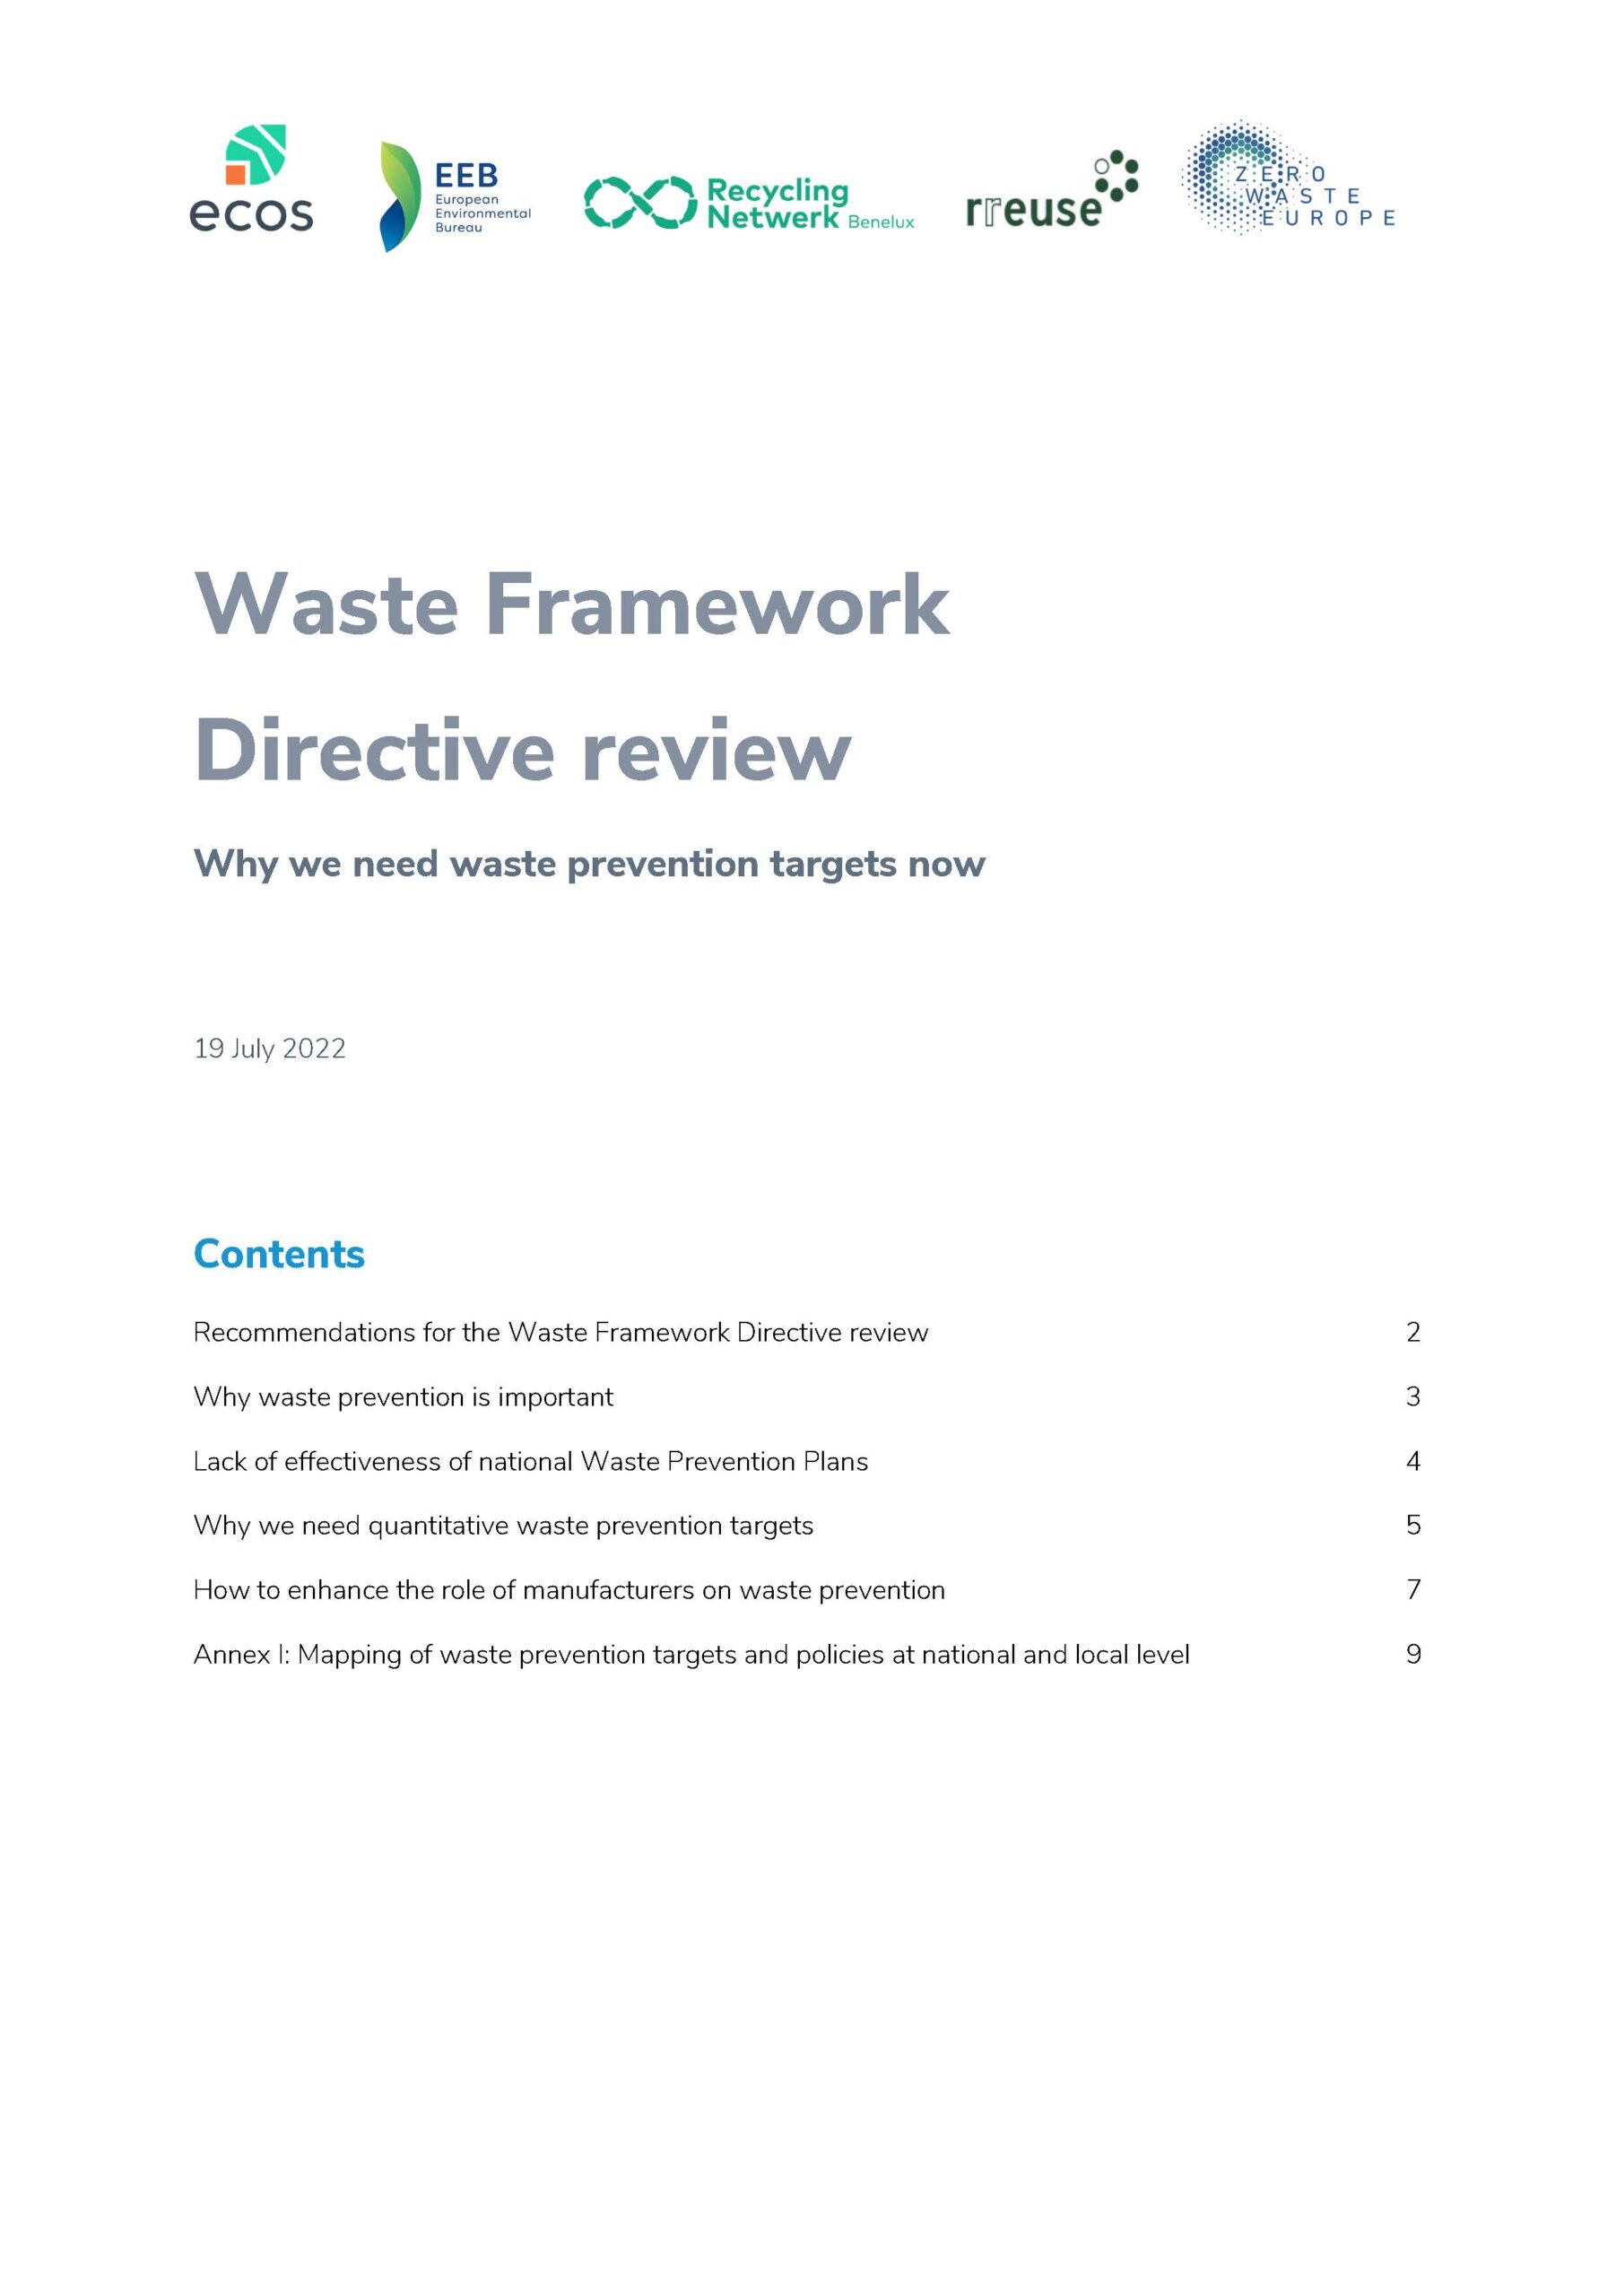 Joint paper: recommendations on waste prevention targets